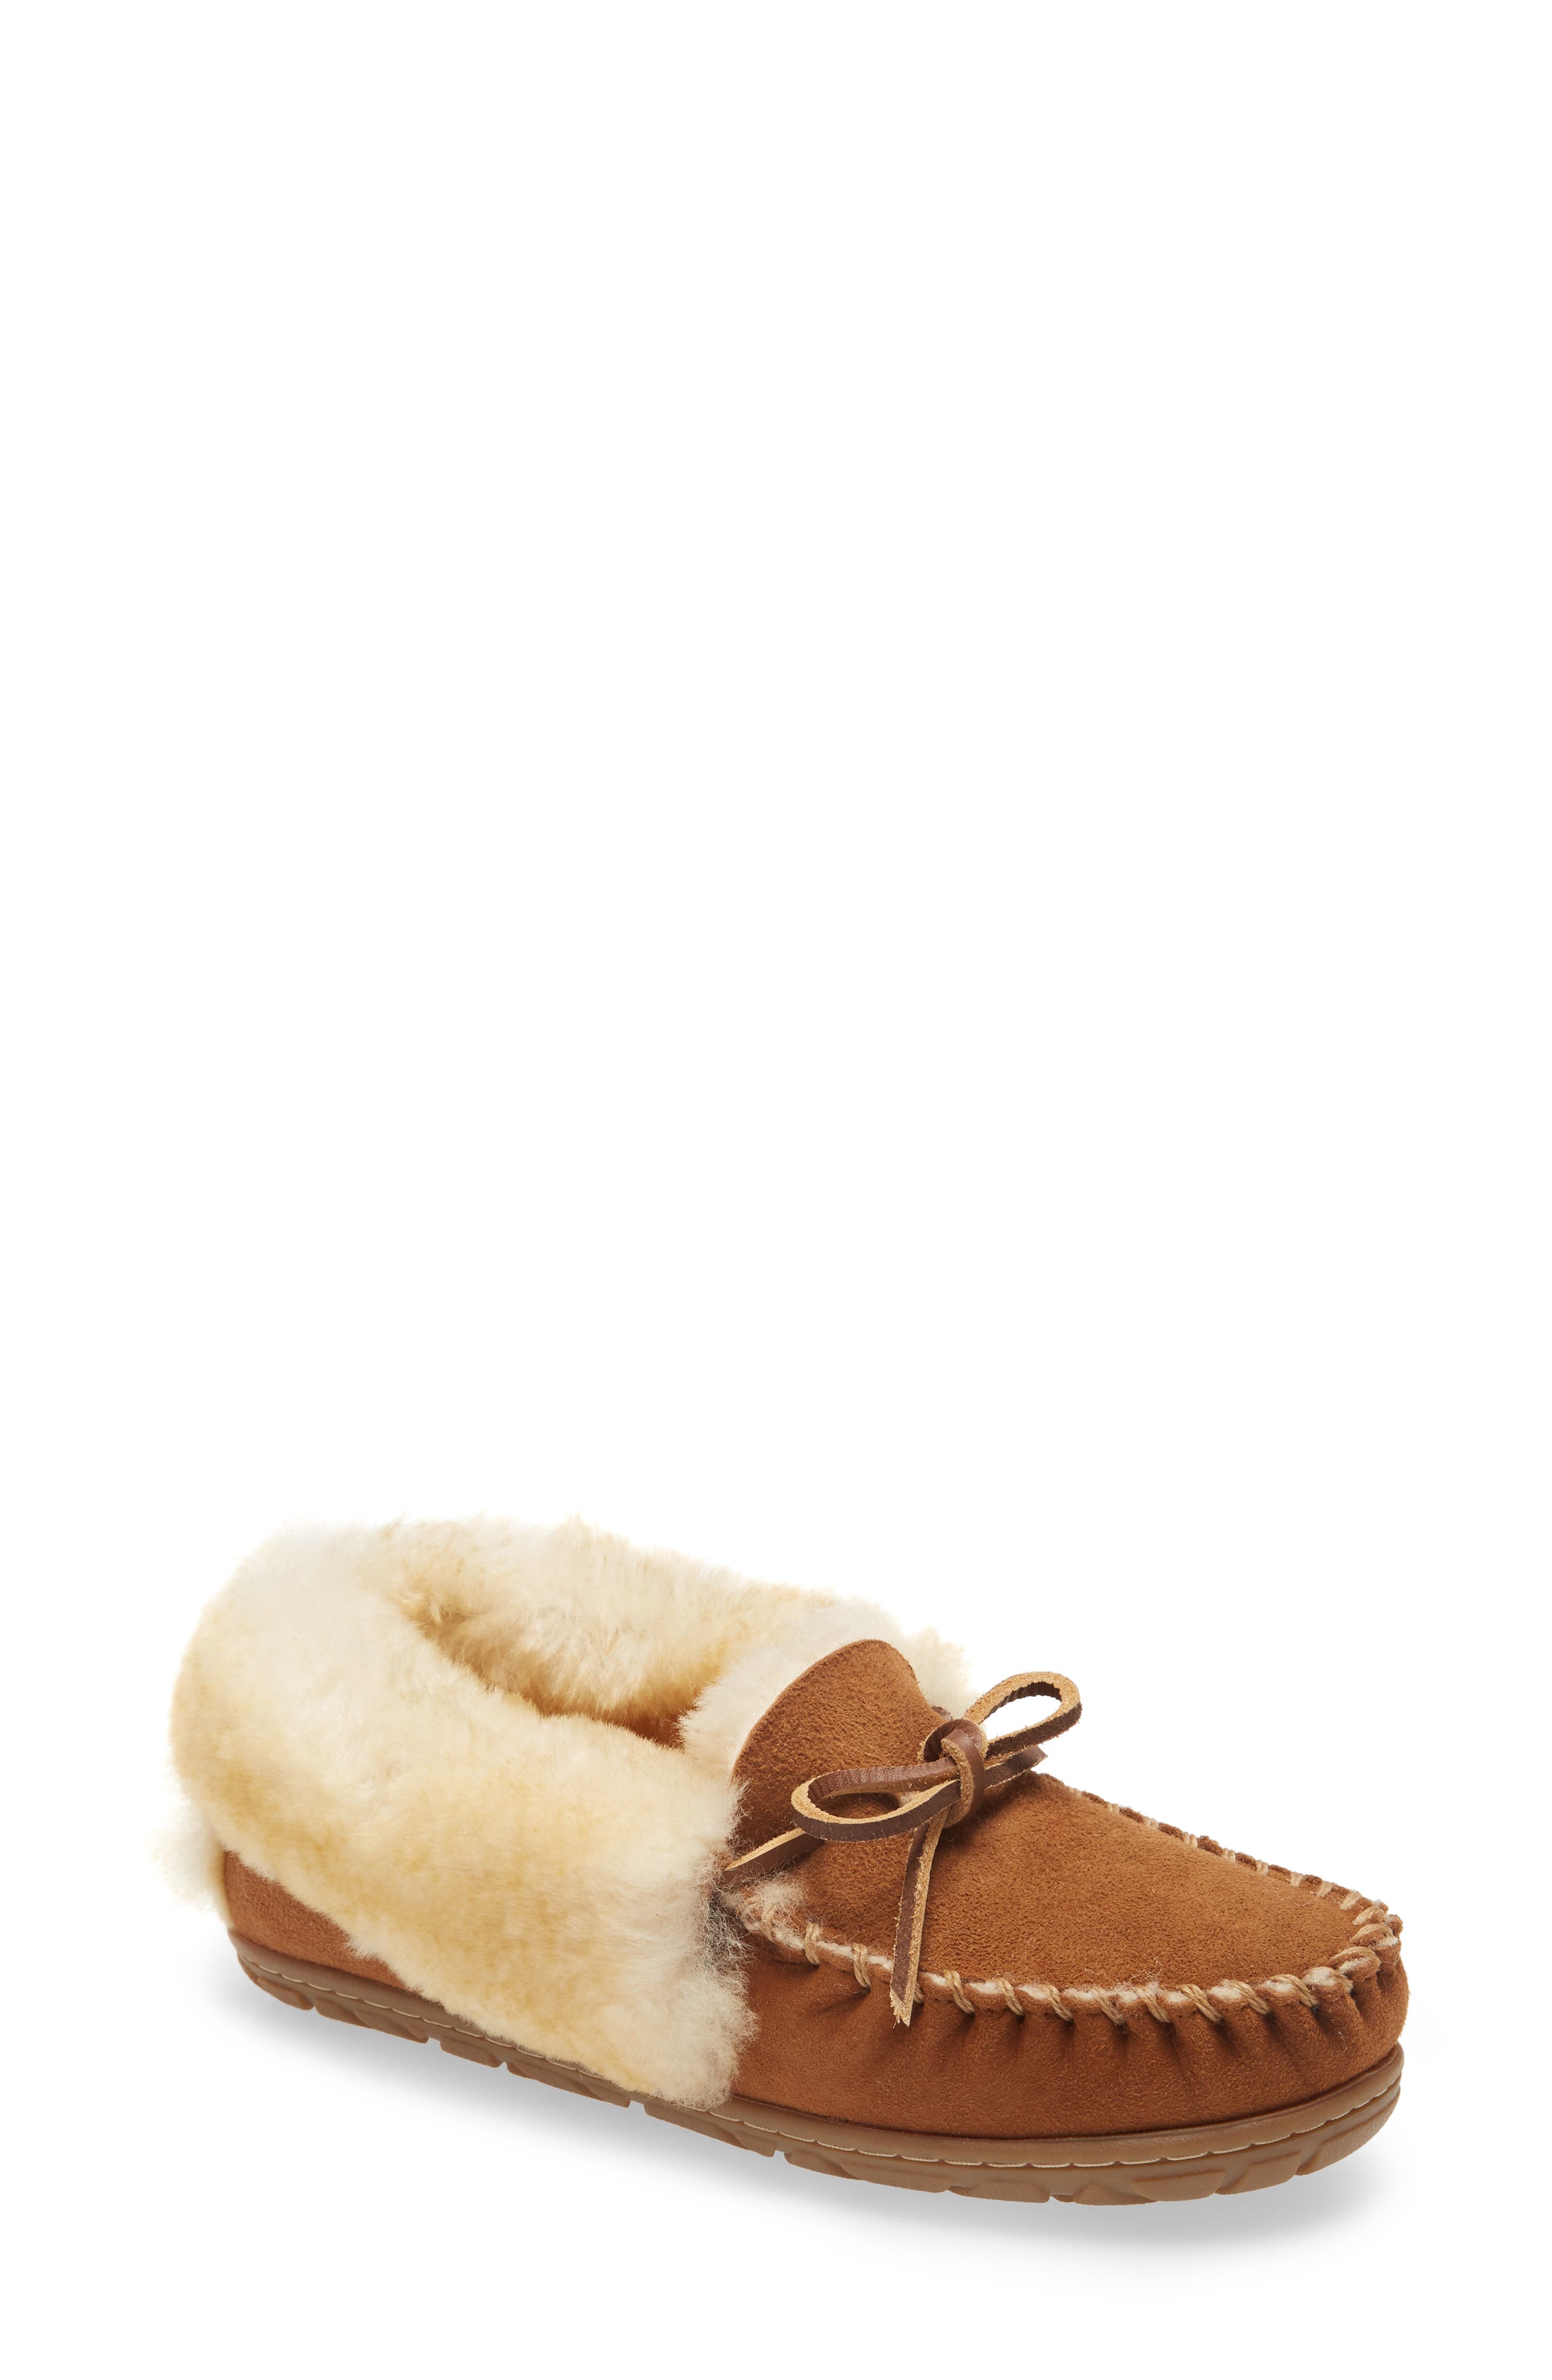 LADIES REAL SUEDE MOCCASIN SLIP ON CASUAL WINTER FAUX FUR SLIPPERS 